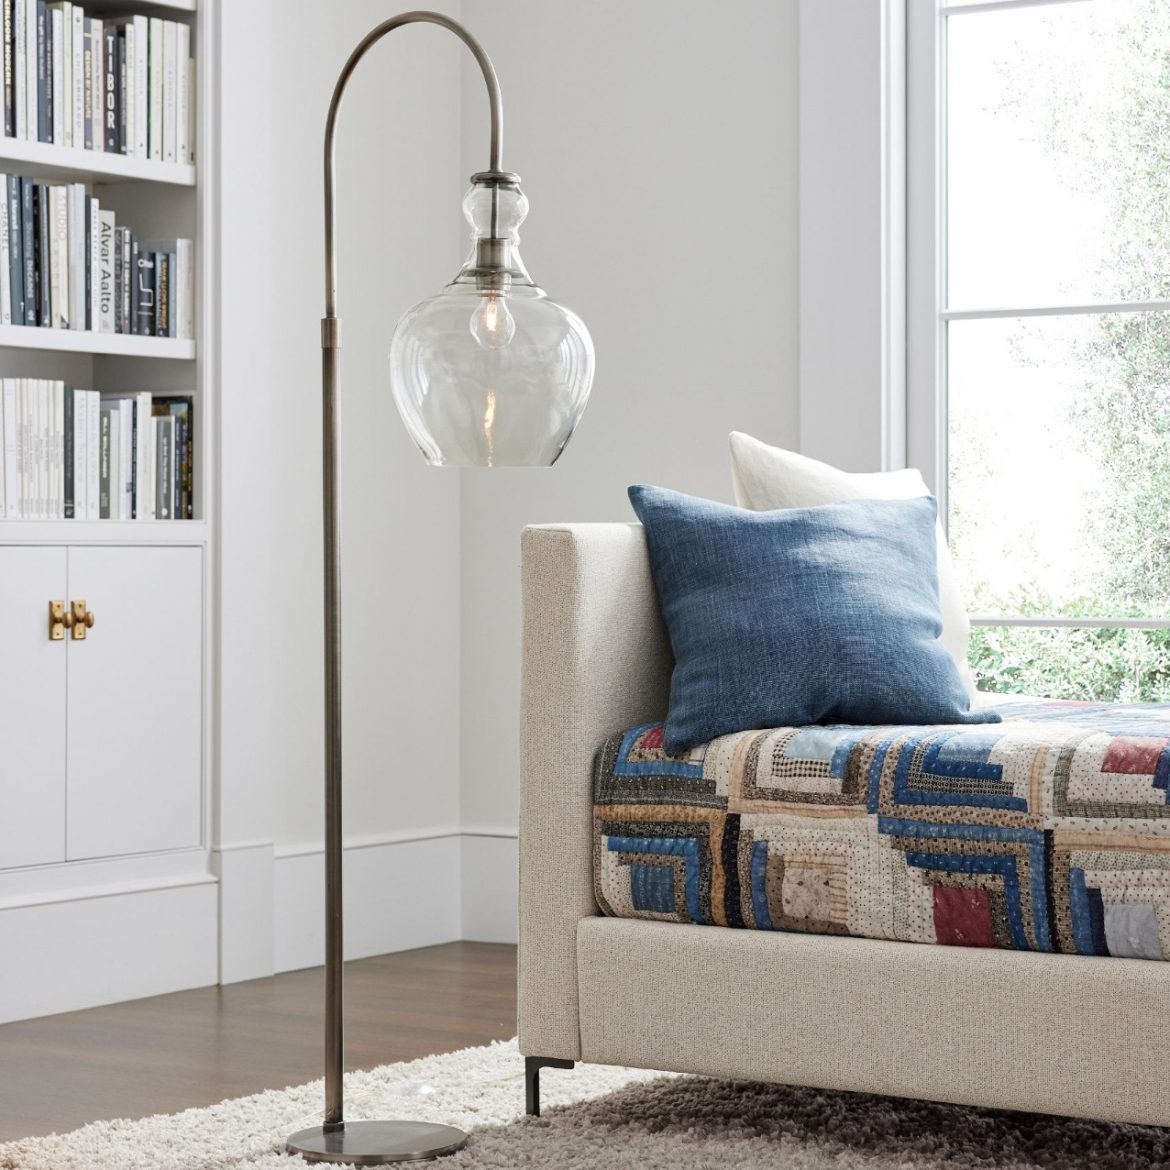 Pære til Panthella Floor Lamp – Illuminating Your Space with Style